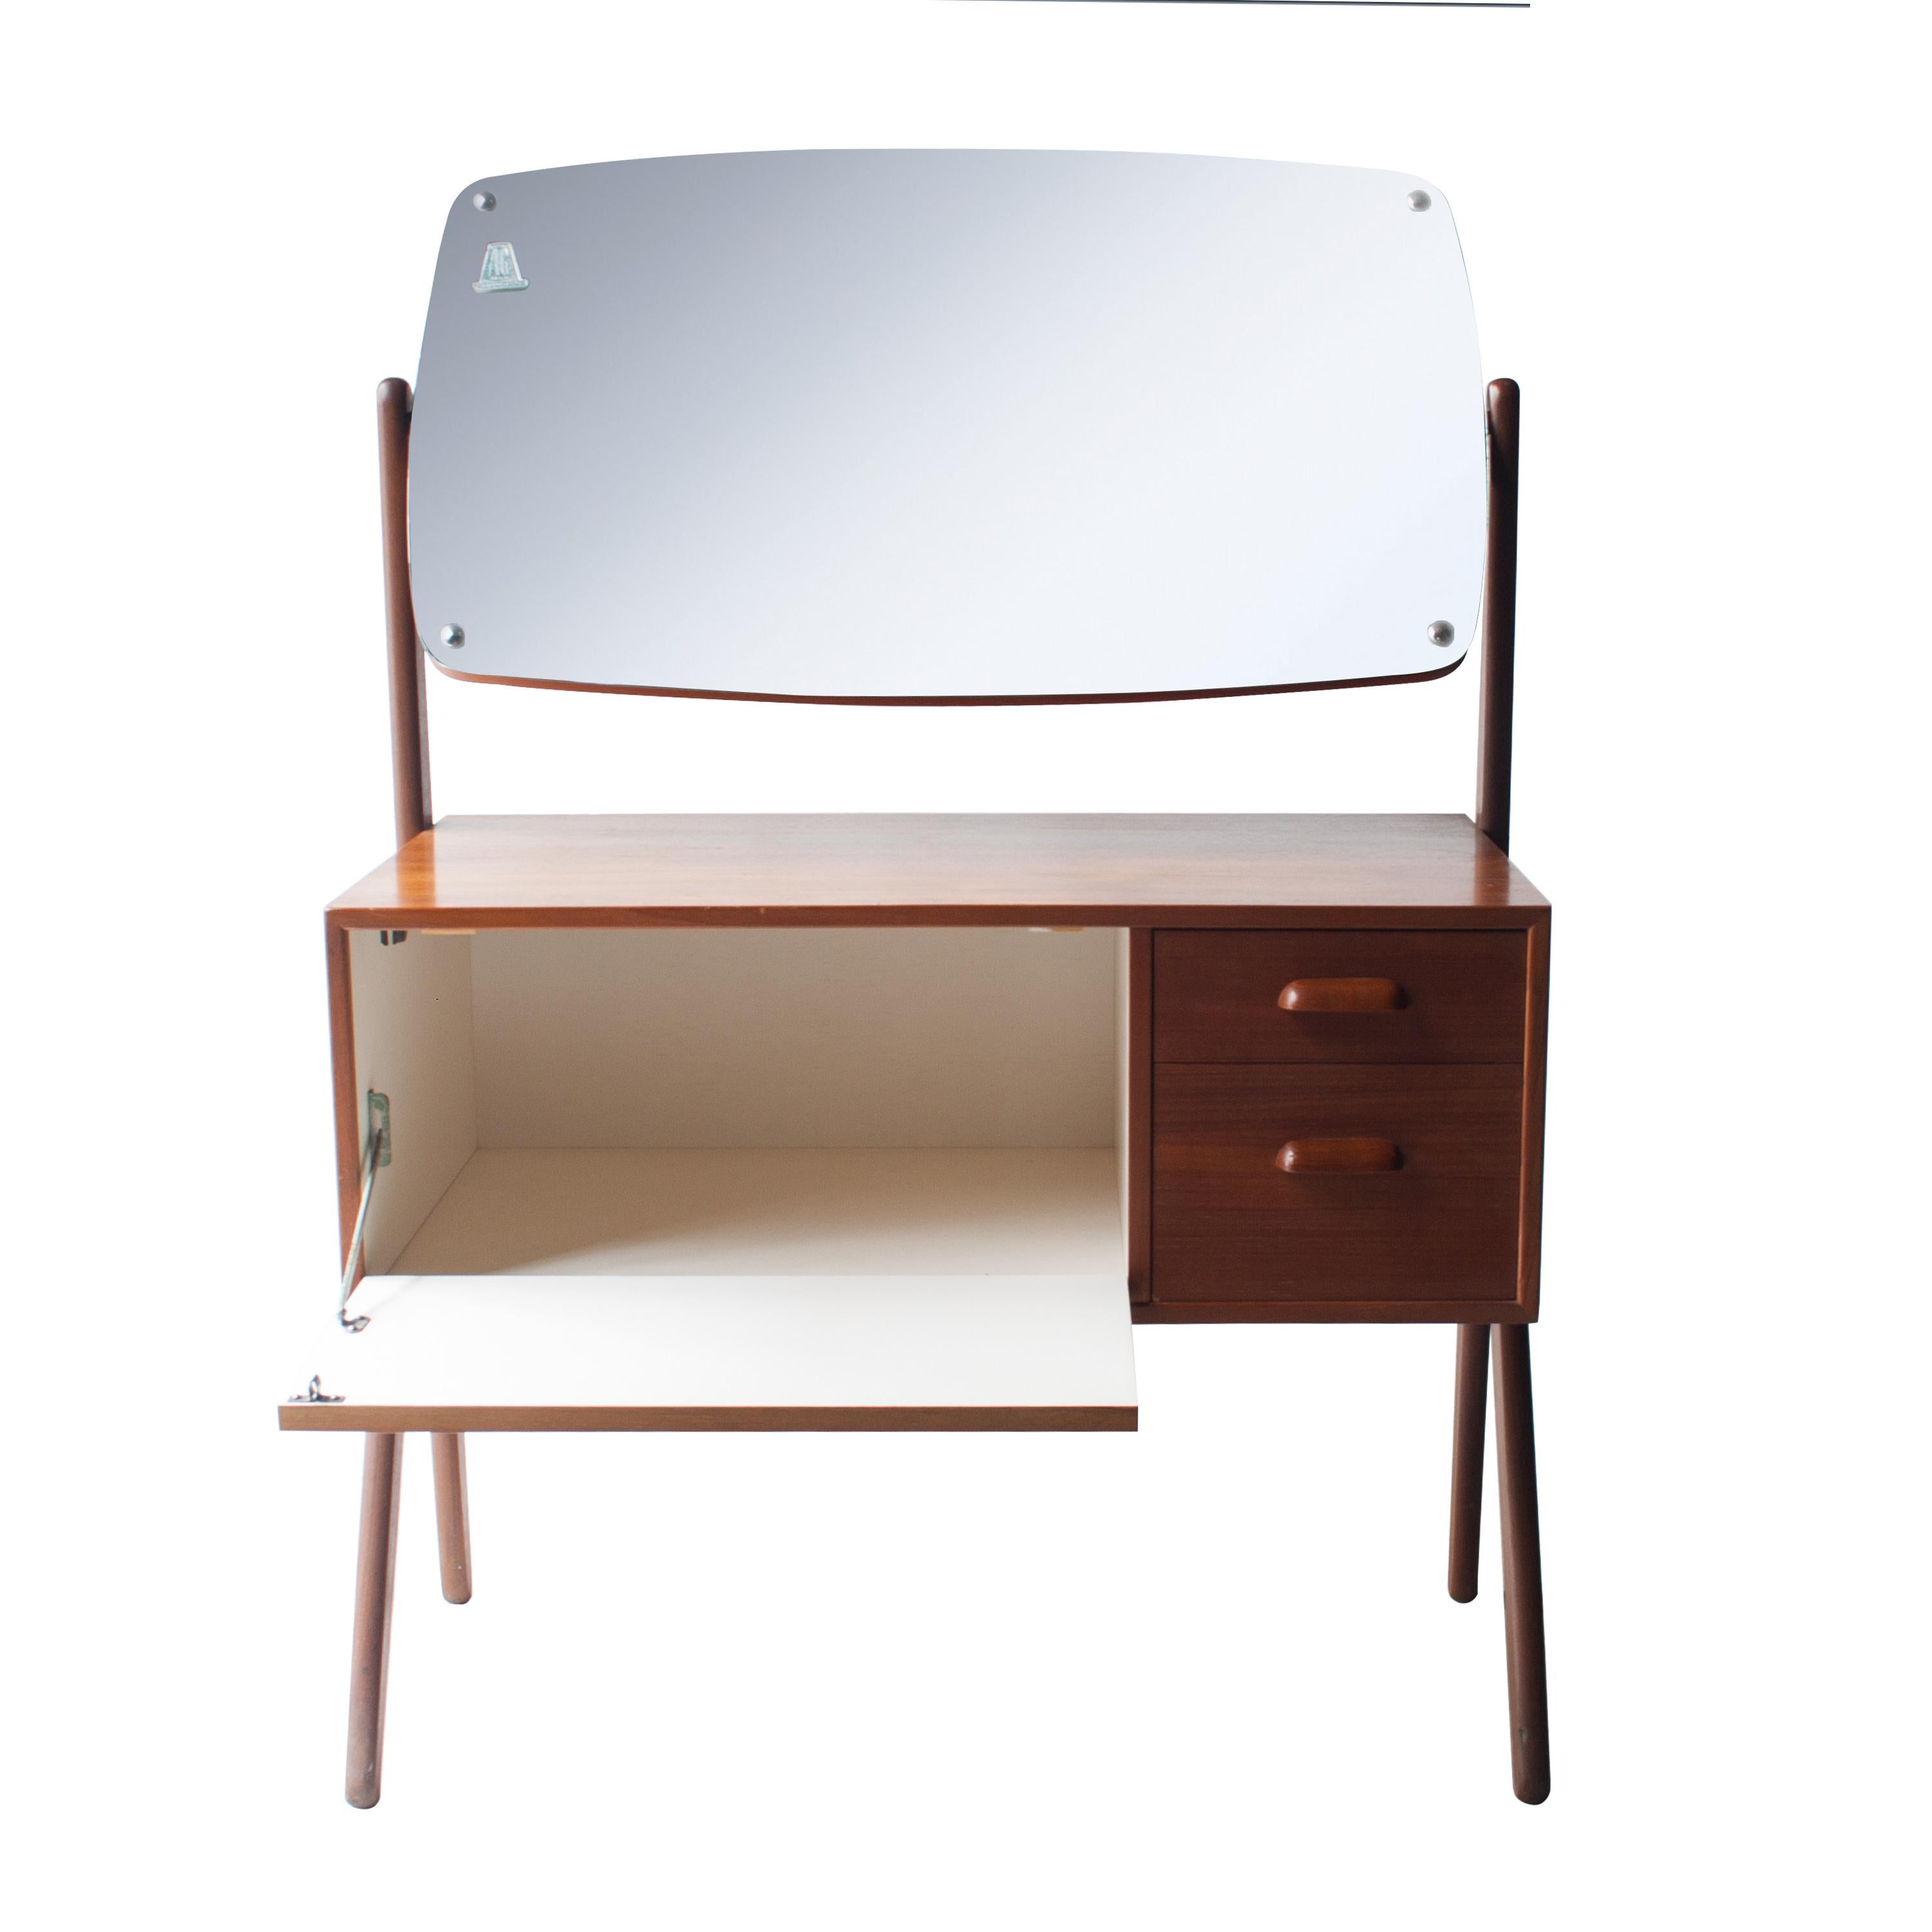 Dresser composed of three drawers and rotating mirror by the AM Kobberbeskyttet seal with structure made of solid teak wood, 1960.